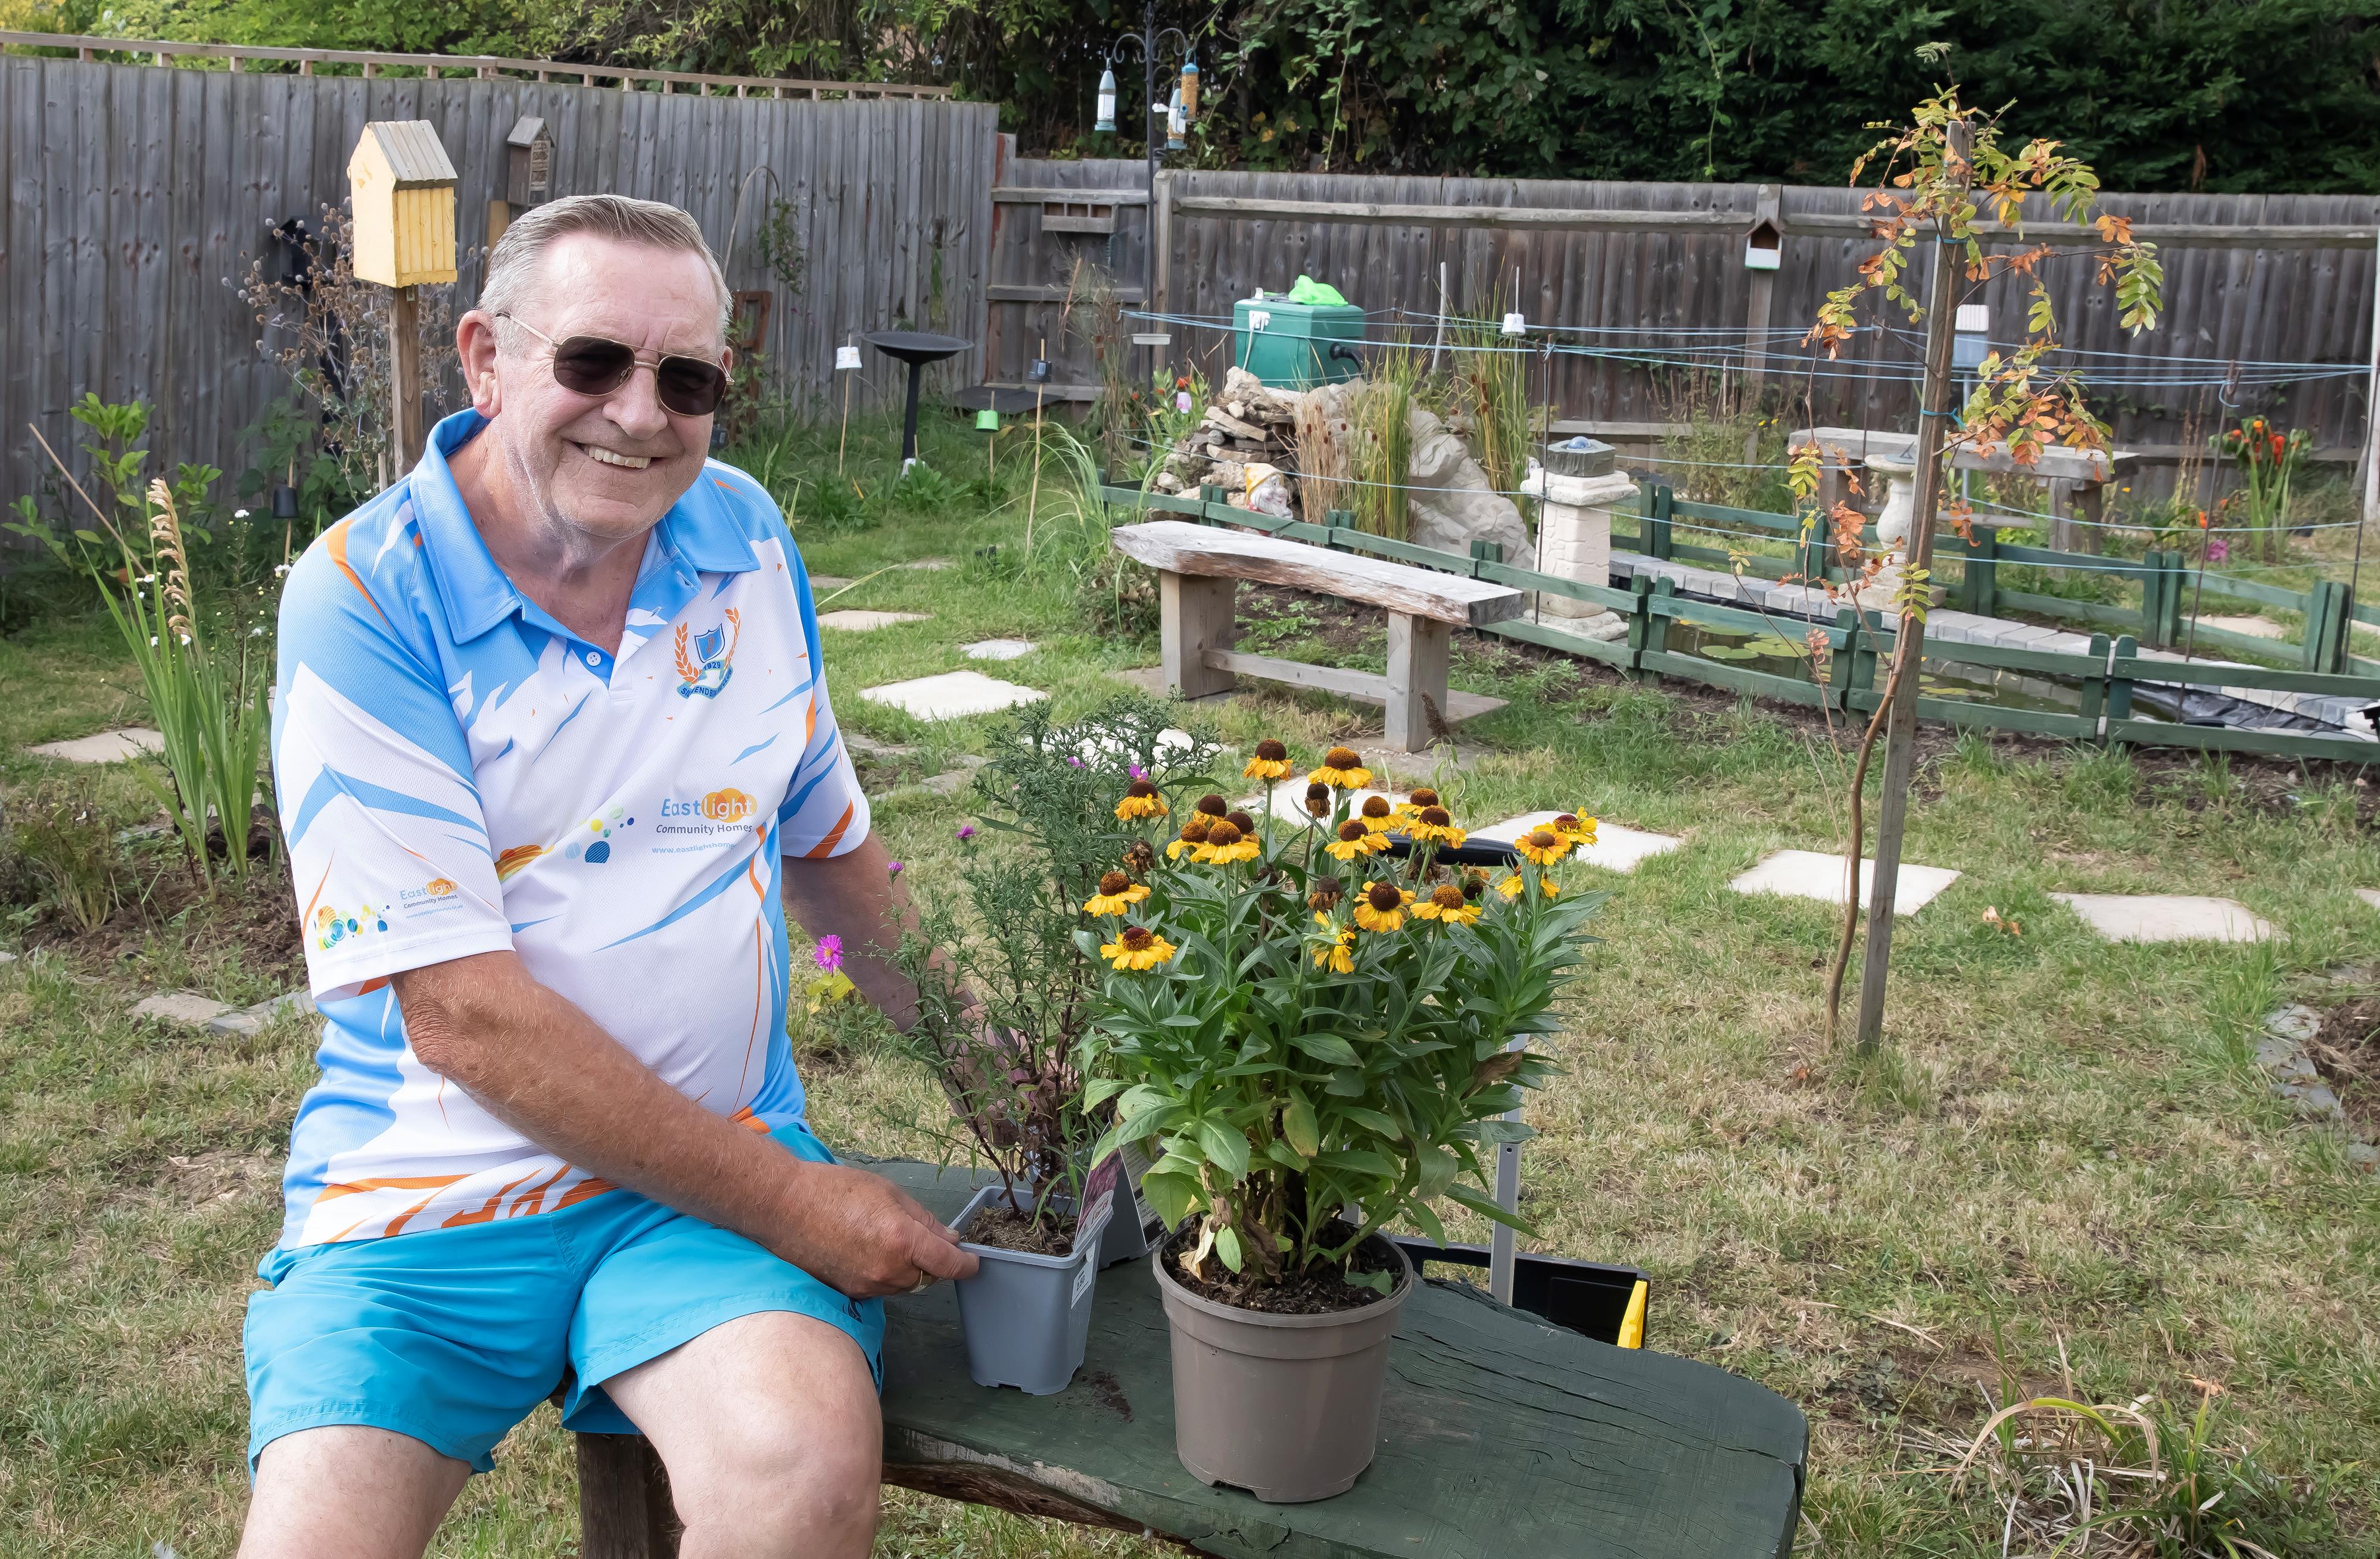 Jeff Spencer is sat on a bench in the community garden in Silver End. There are pots of flowers around him.